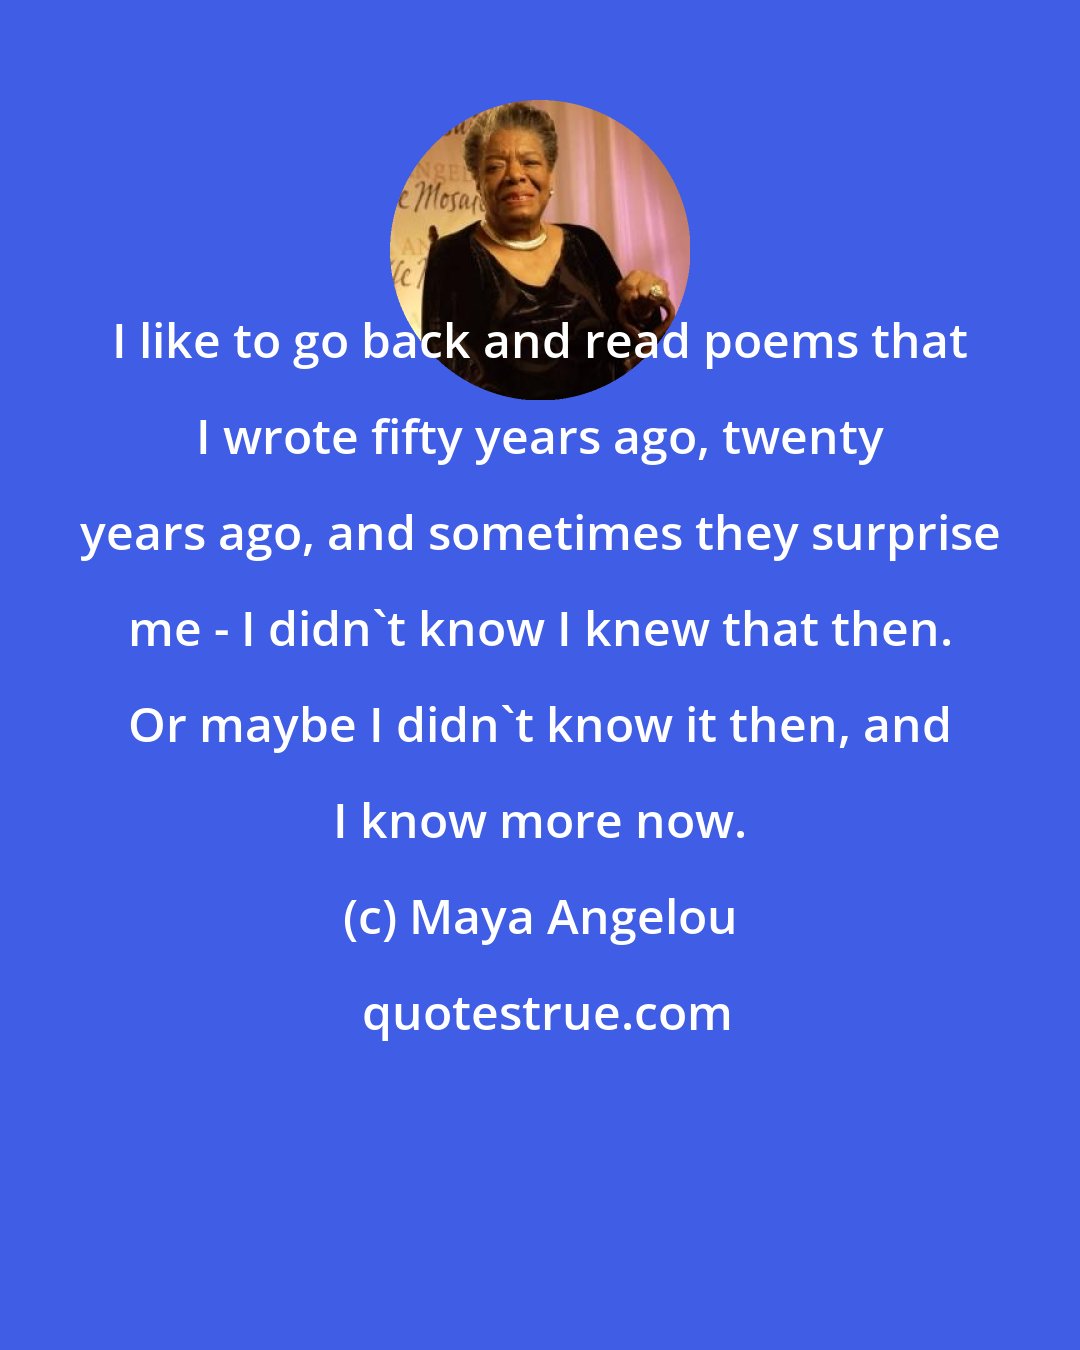 Maya Angelou: I like to go back and read poems that I wrote fifty years ago, twenty years ago, and sometimes they surprise me - I didn't know I knew that then. Or maybe I didn't know it then, and I know more now.